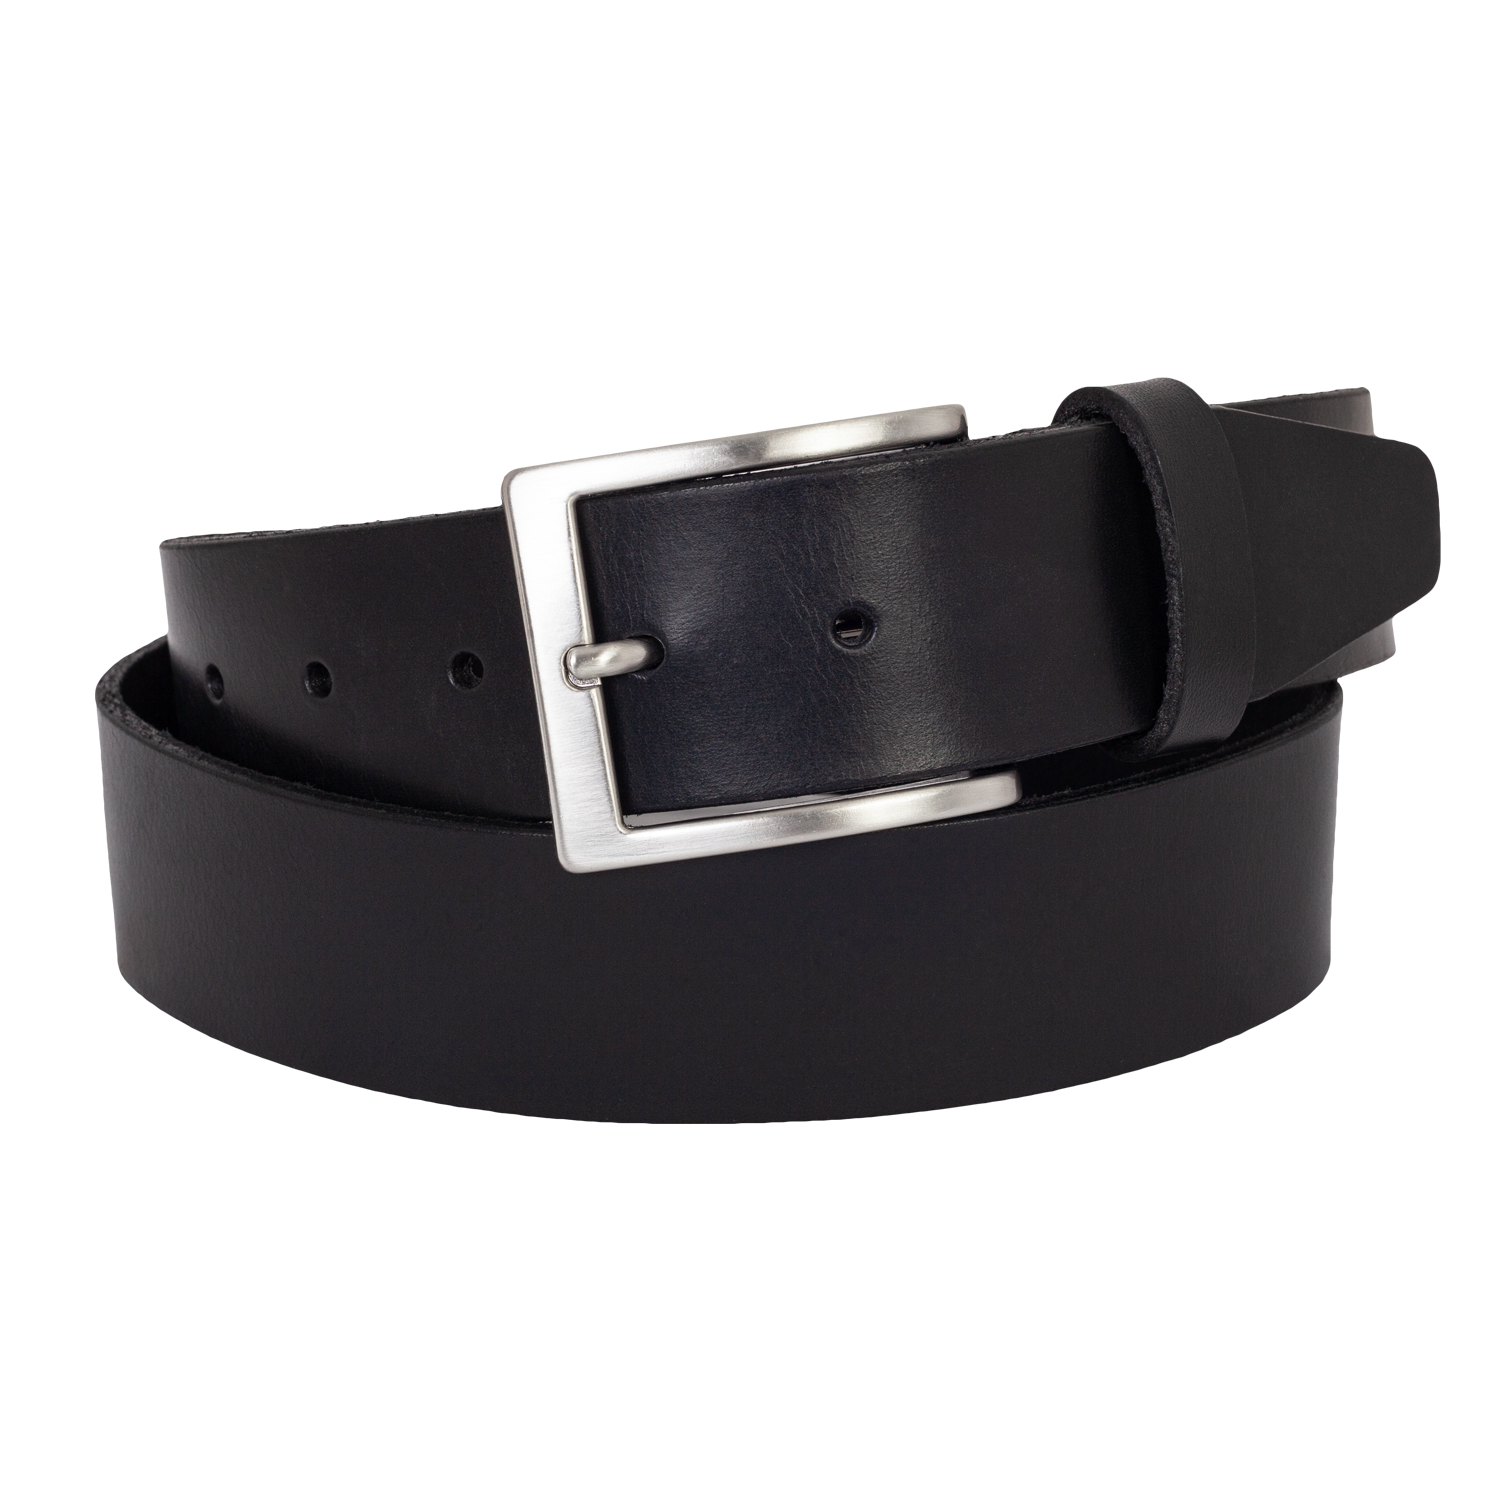 Leather belt in black by Kapart in large sizes 105 - 175